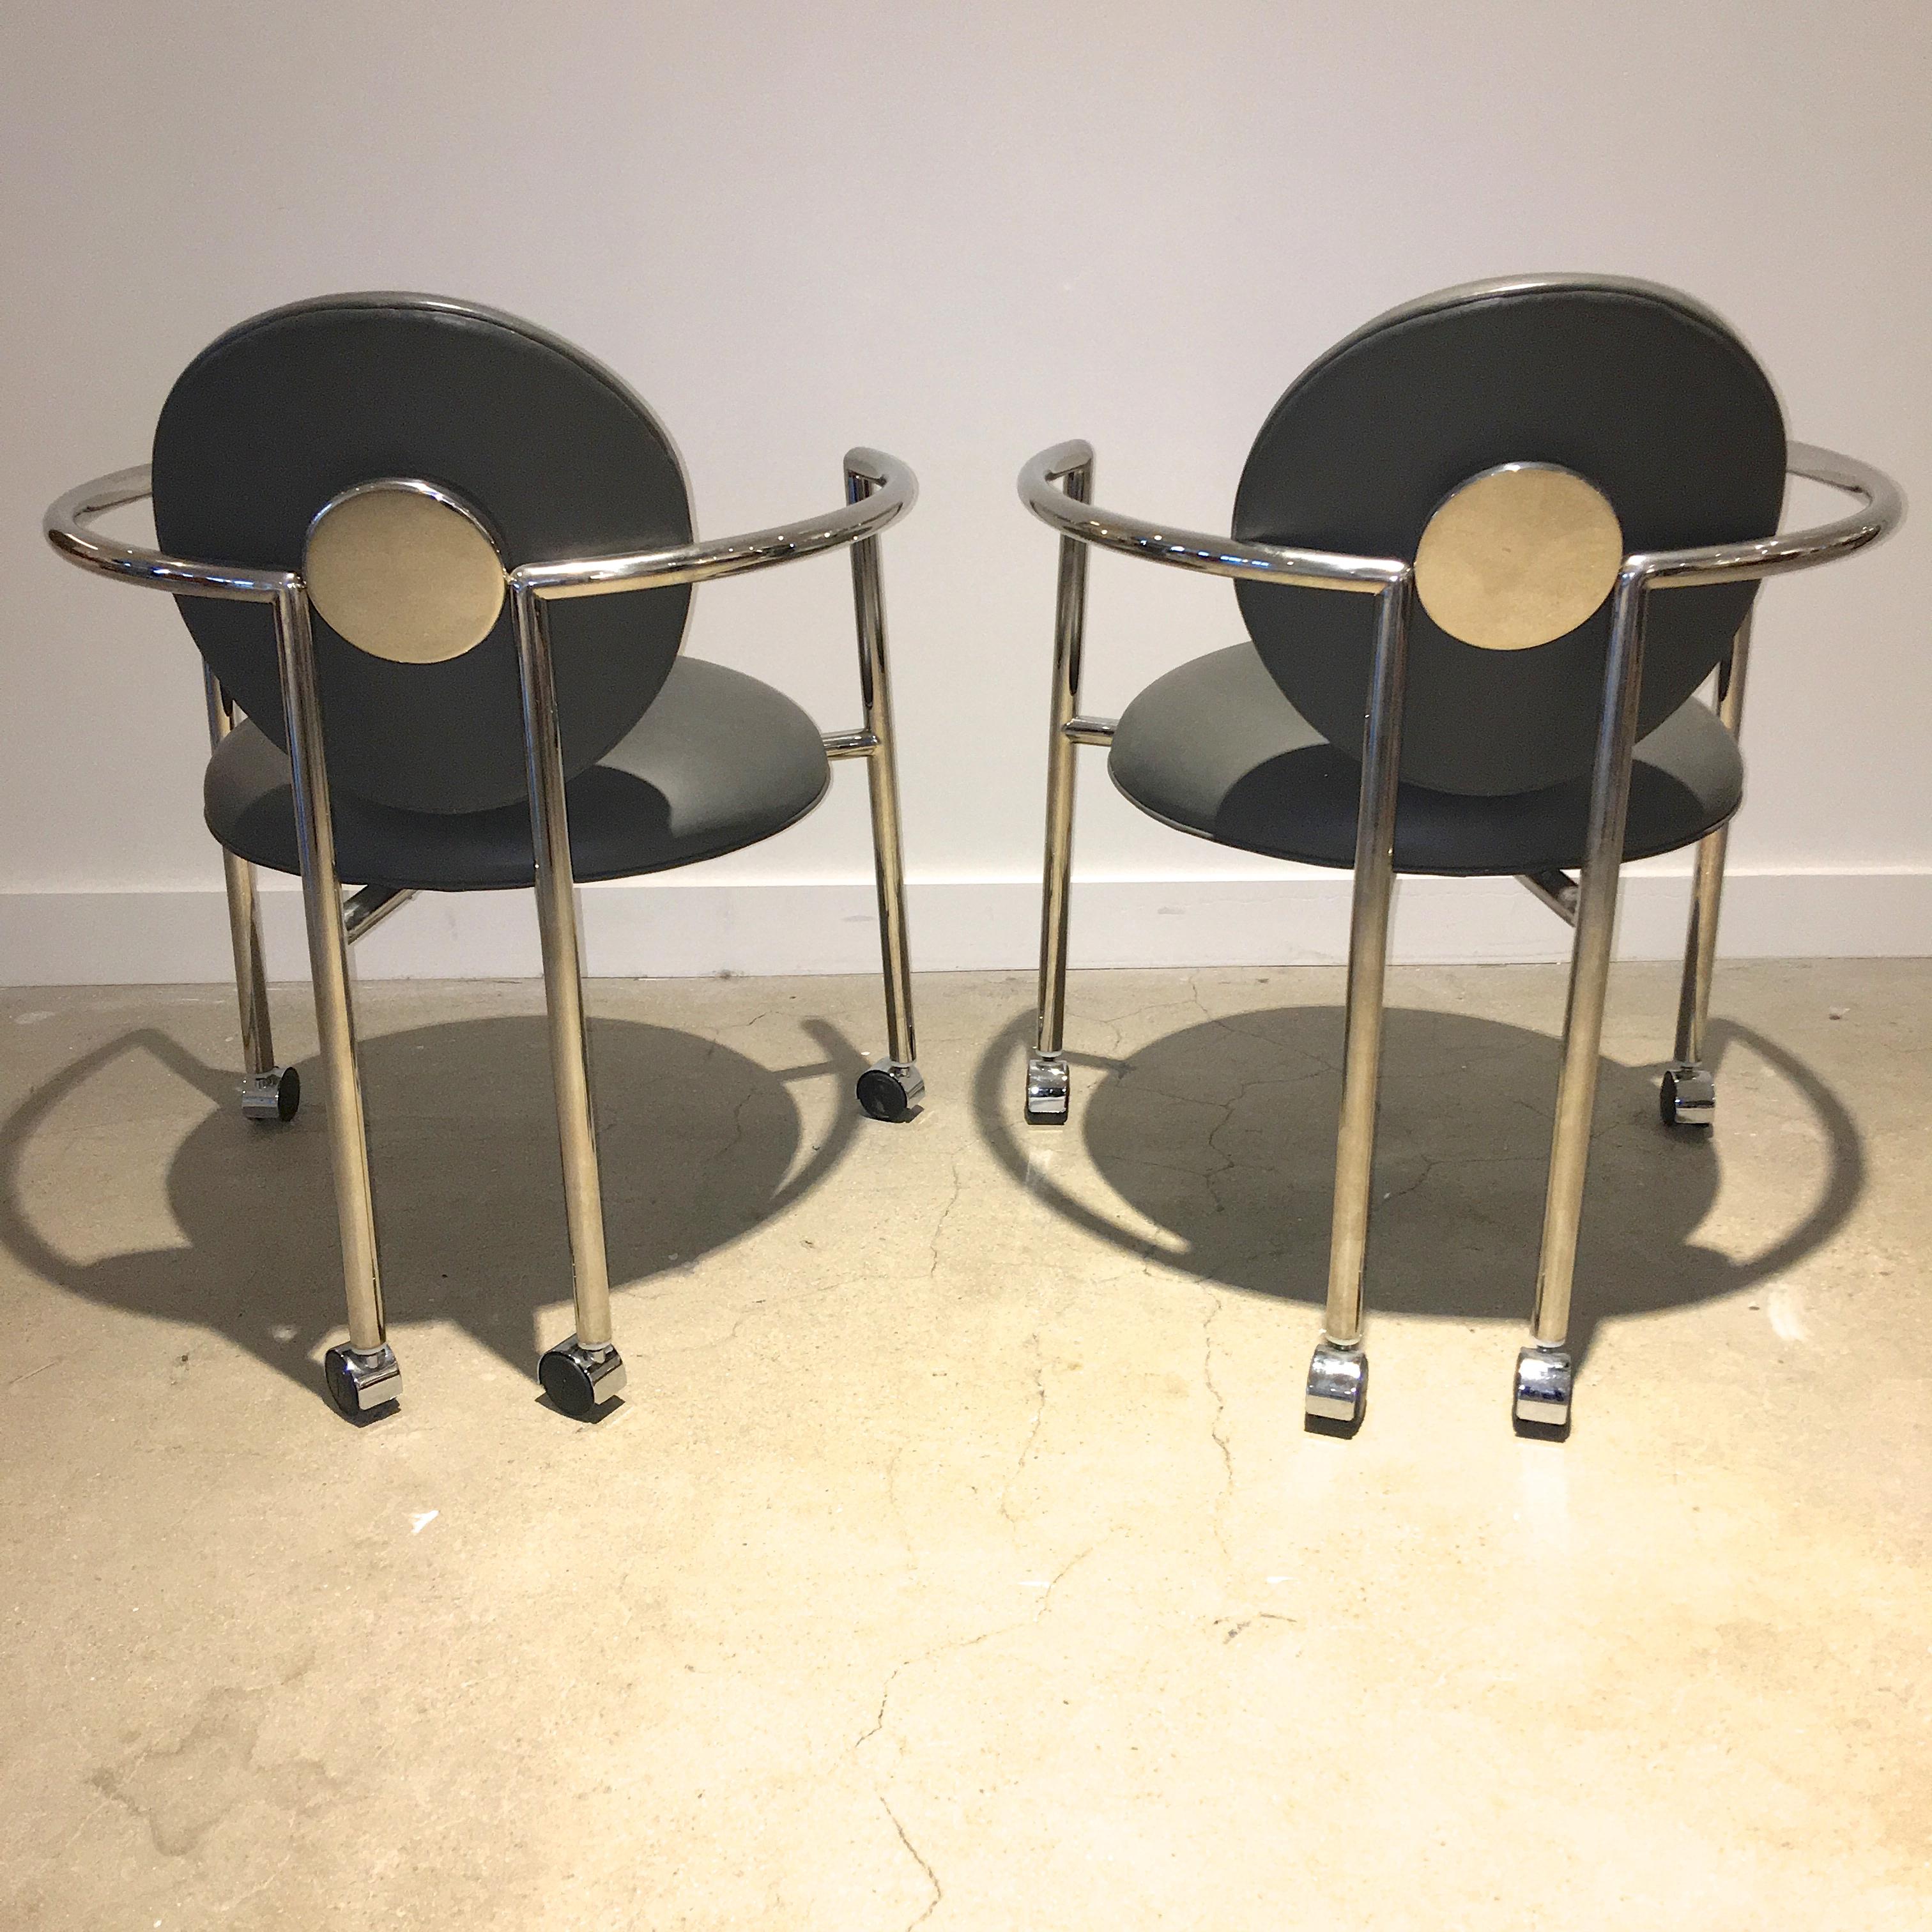 moon chairs for sale